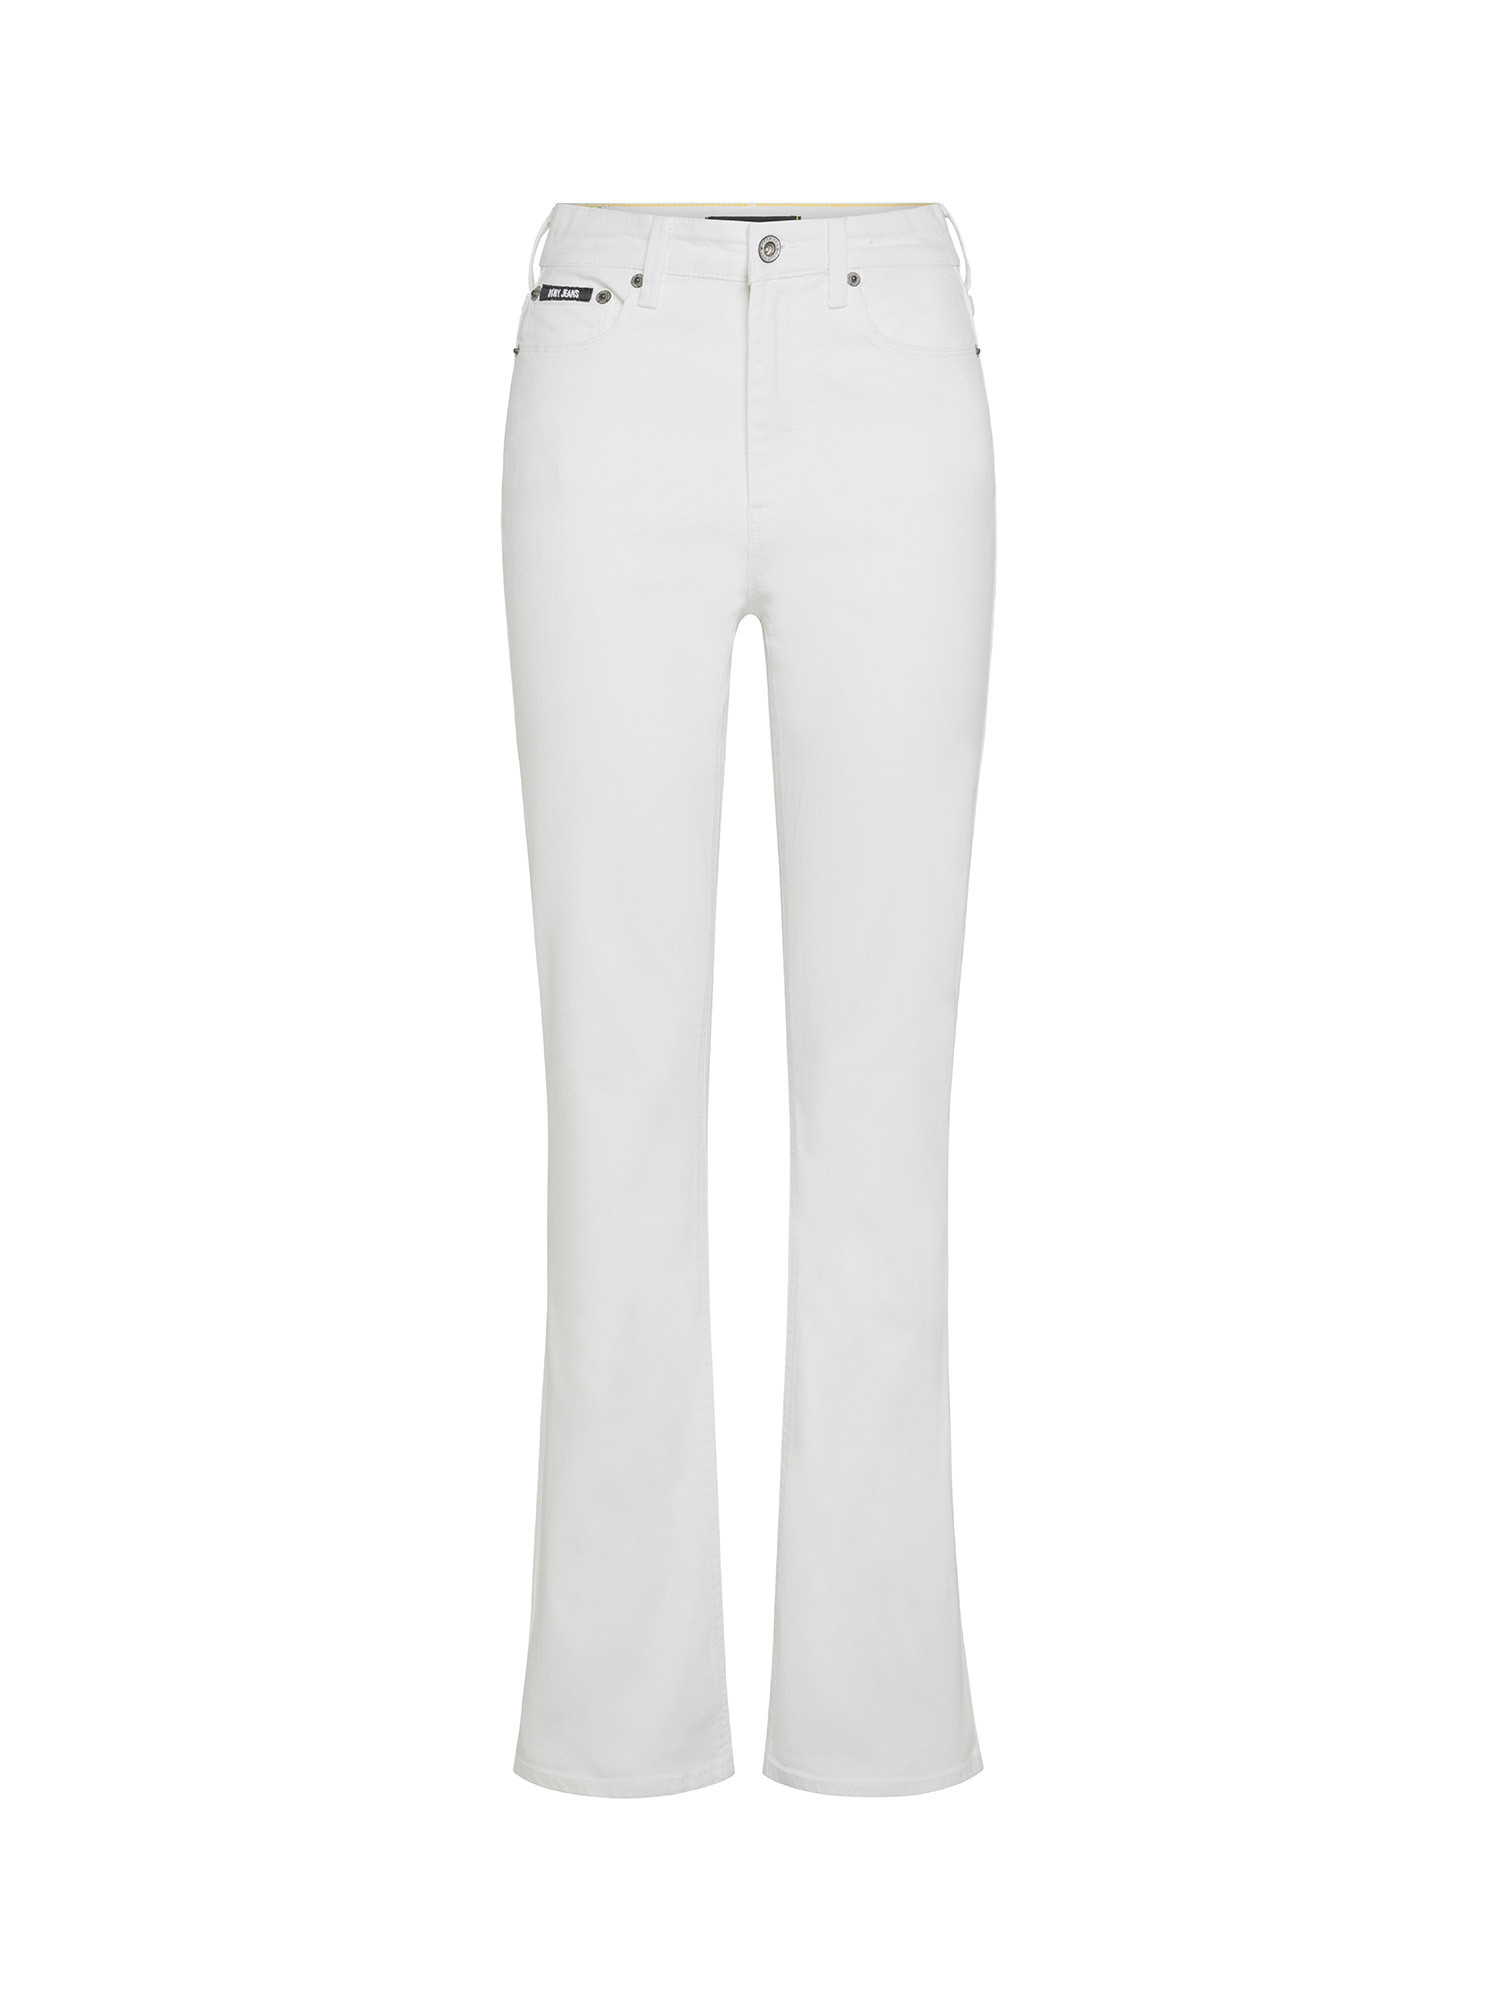 DKNY - High waist flaire jeans, White, large image number 0